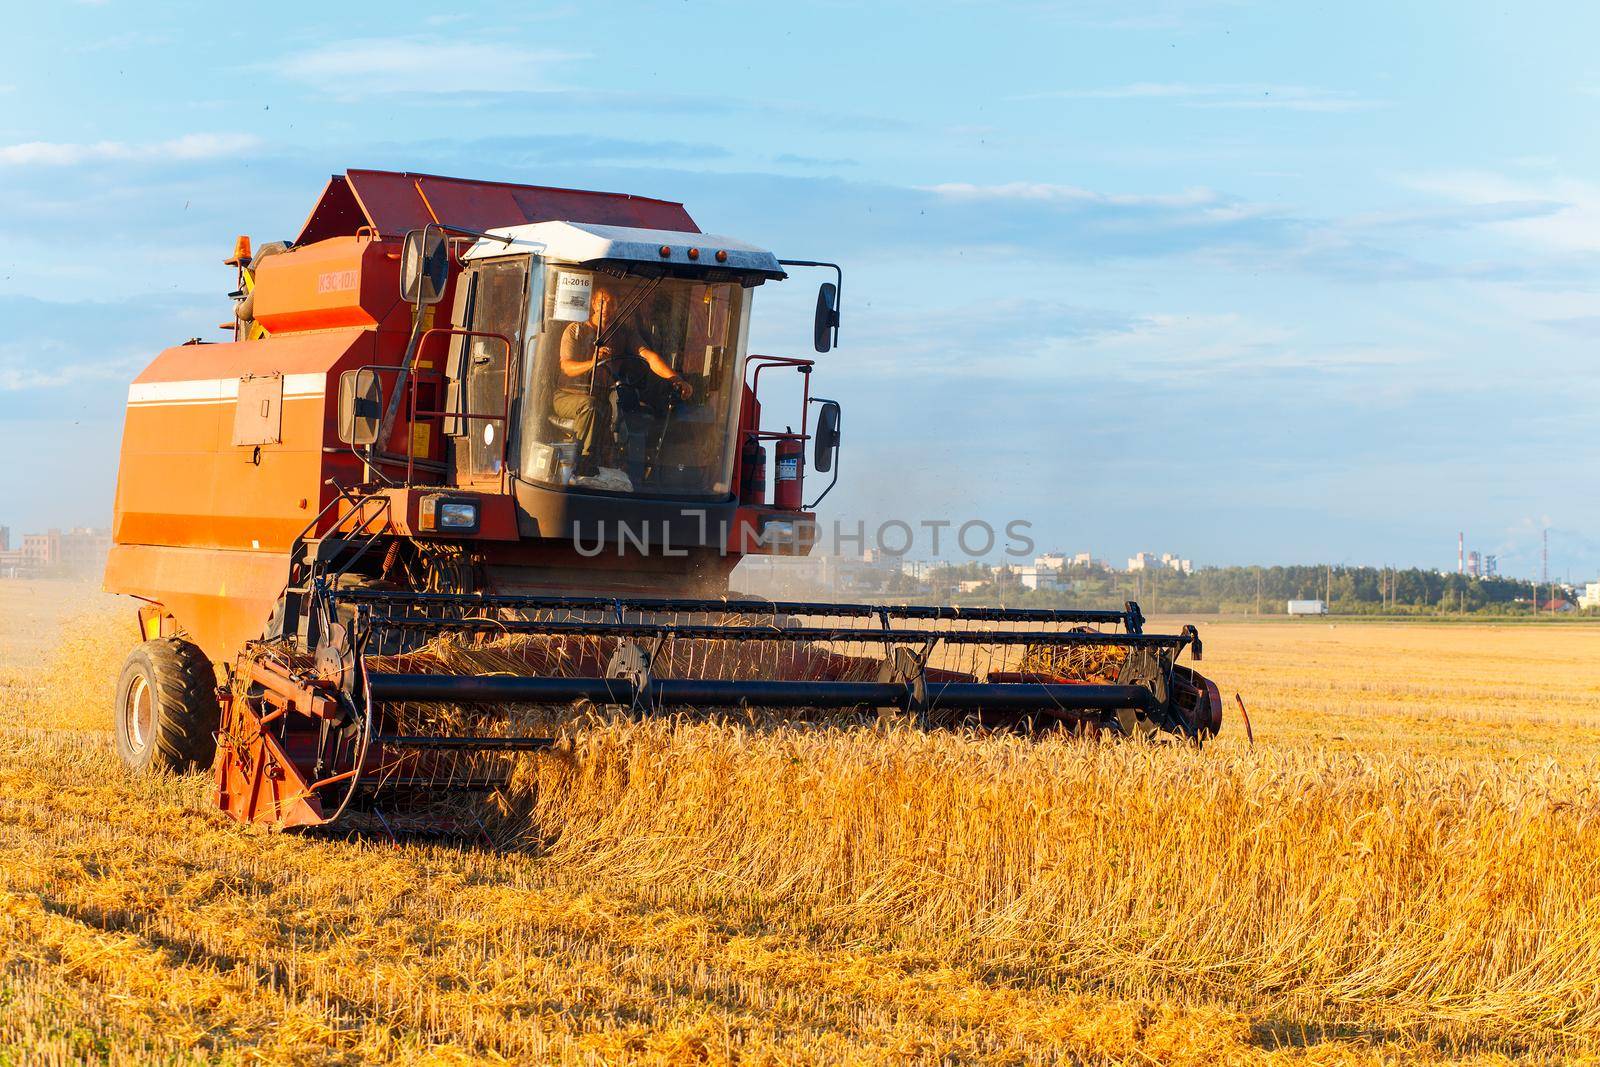 GRODNO, BELARUS - AUG 02: Combine harvester working on a wheat field near the living buildings on August 02, 2016 in Grodno, Belarus